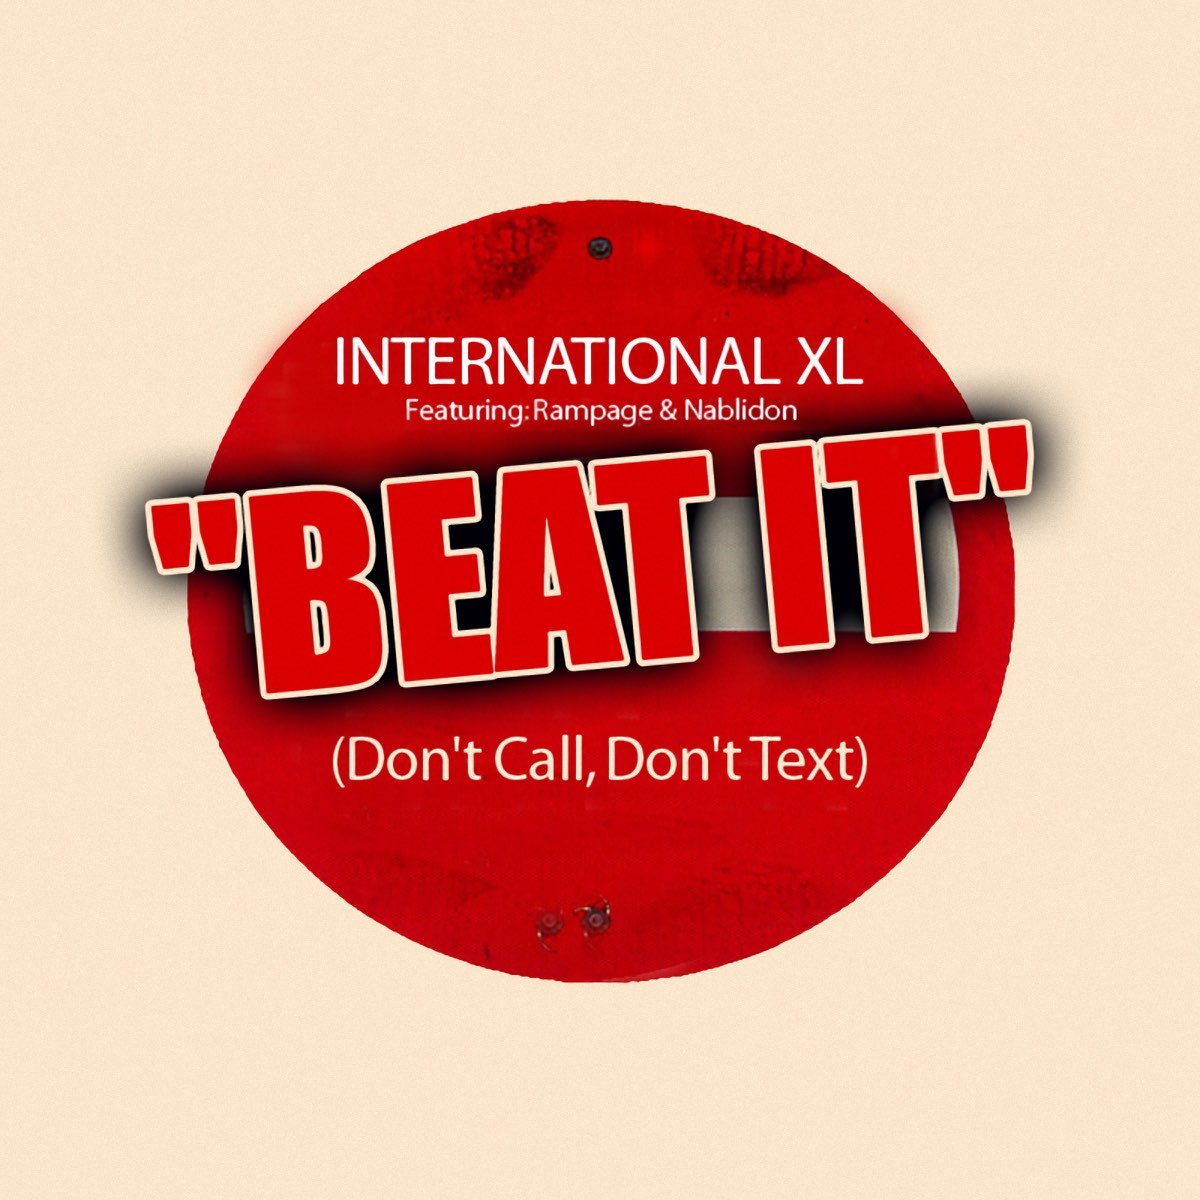 Dont text. Beat it text.